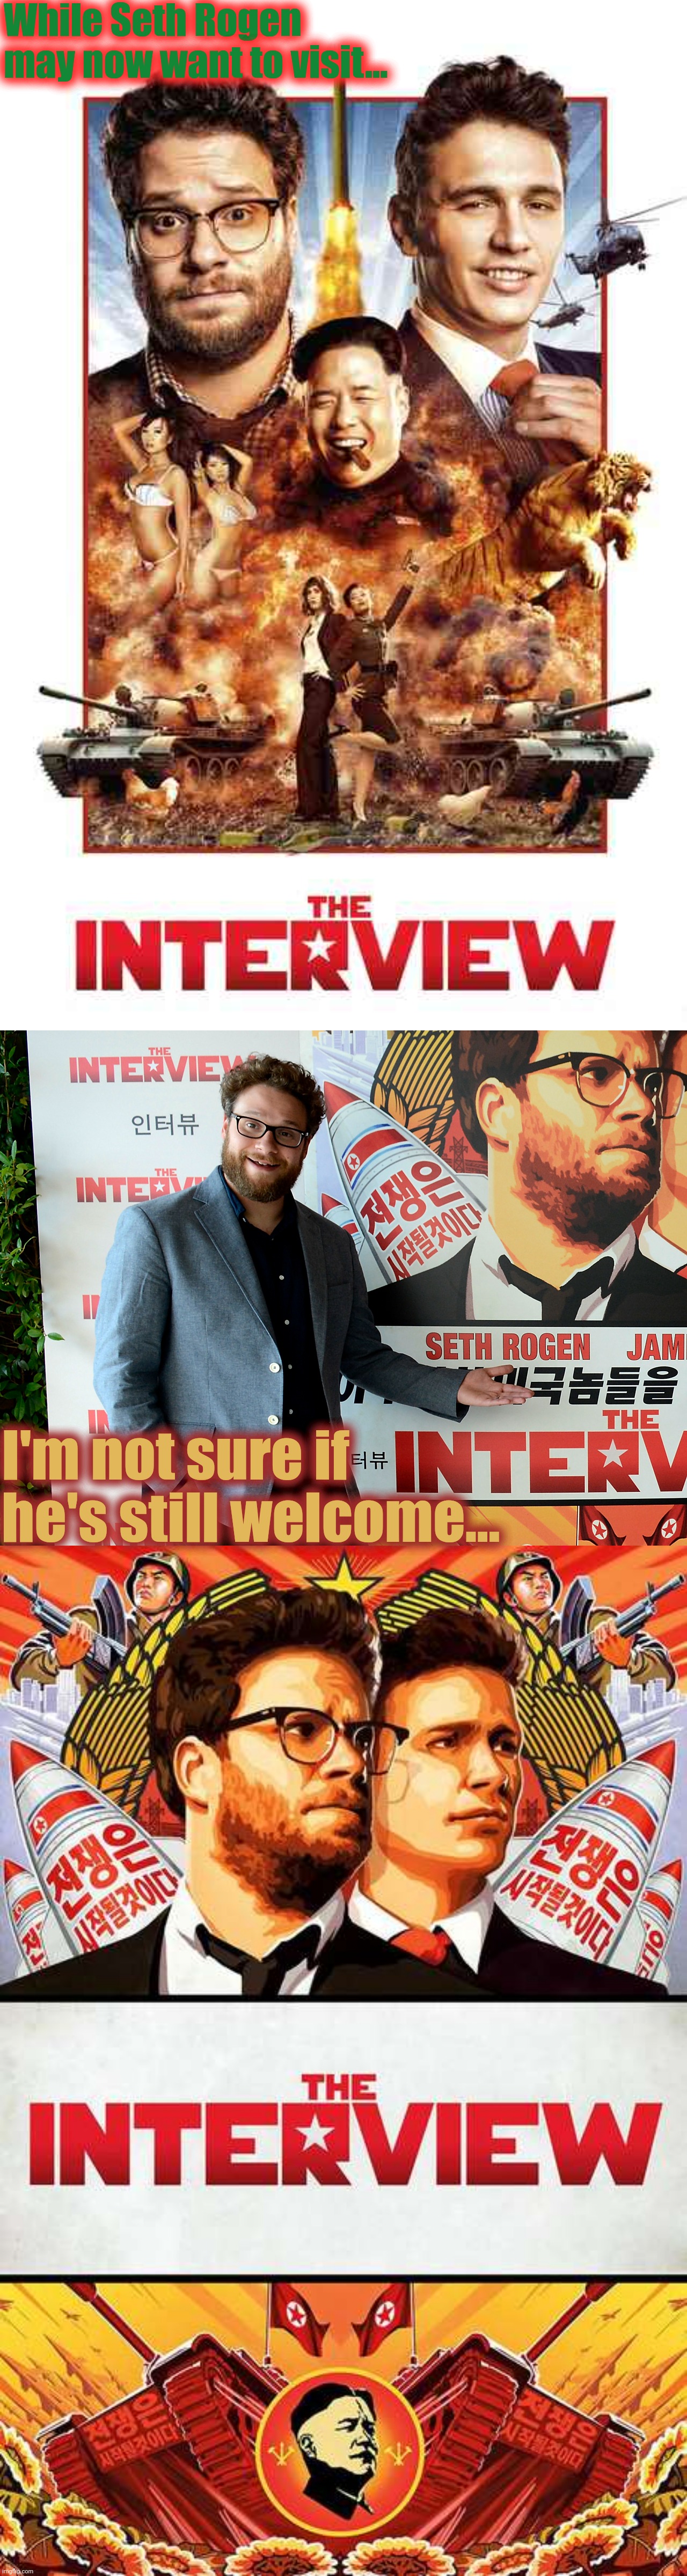 While Seth Rogen may now want to visit... I'm not sure if he's still welcome... | made w/ Imgflip meme maker